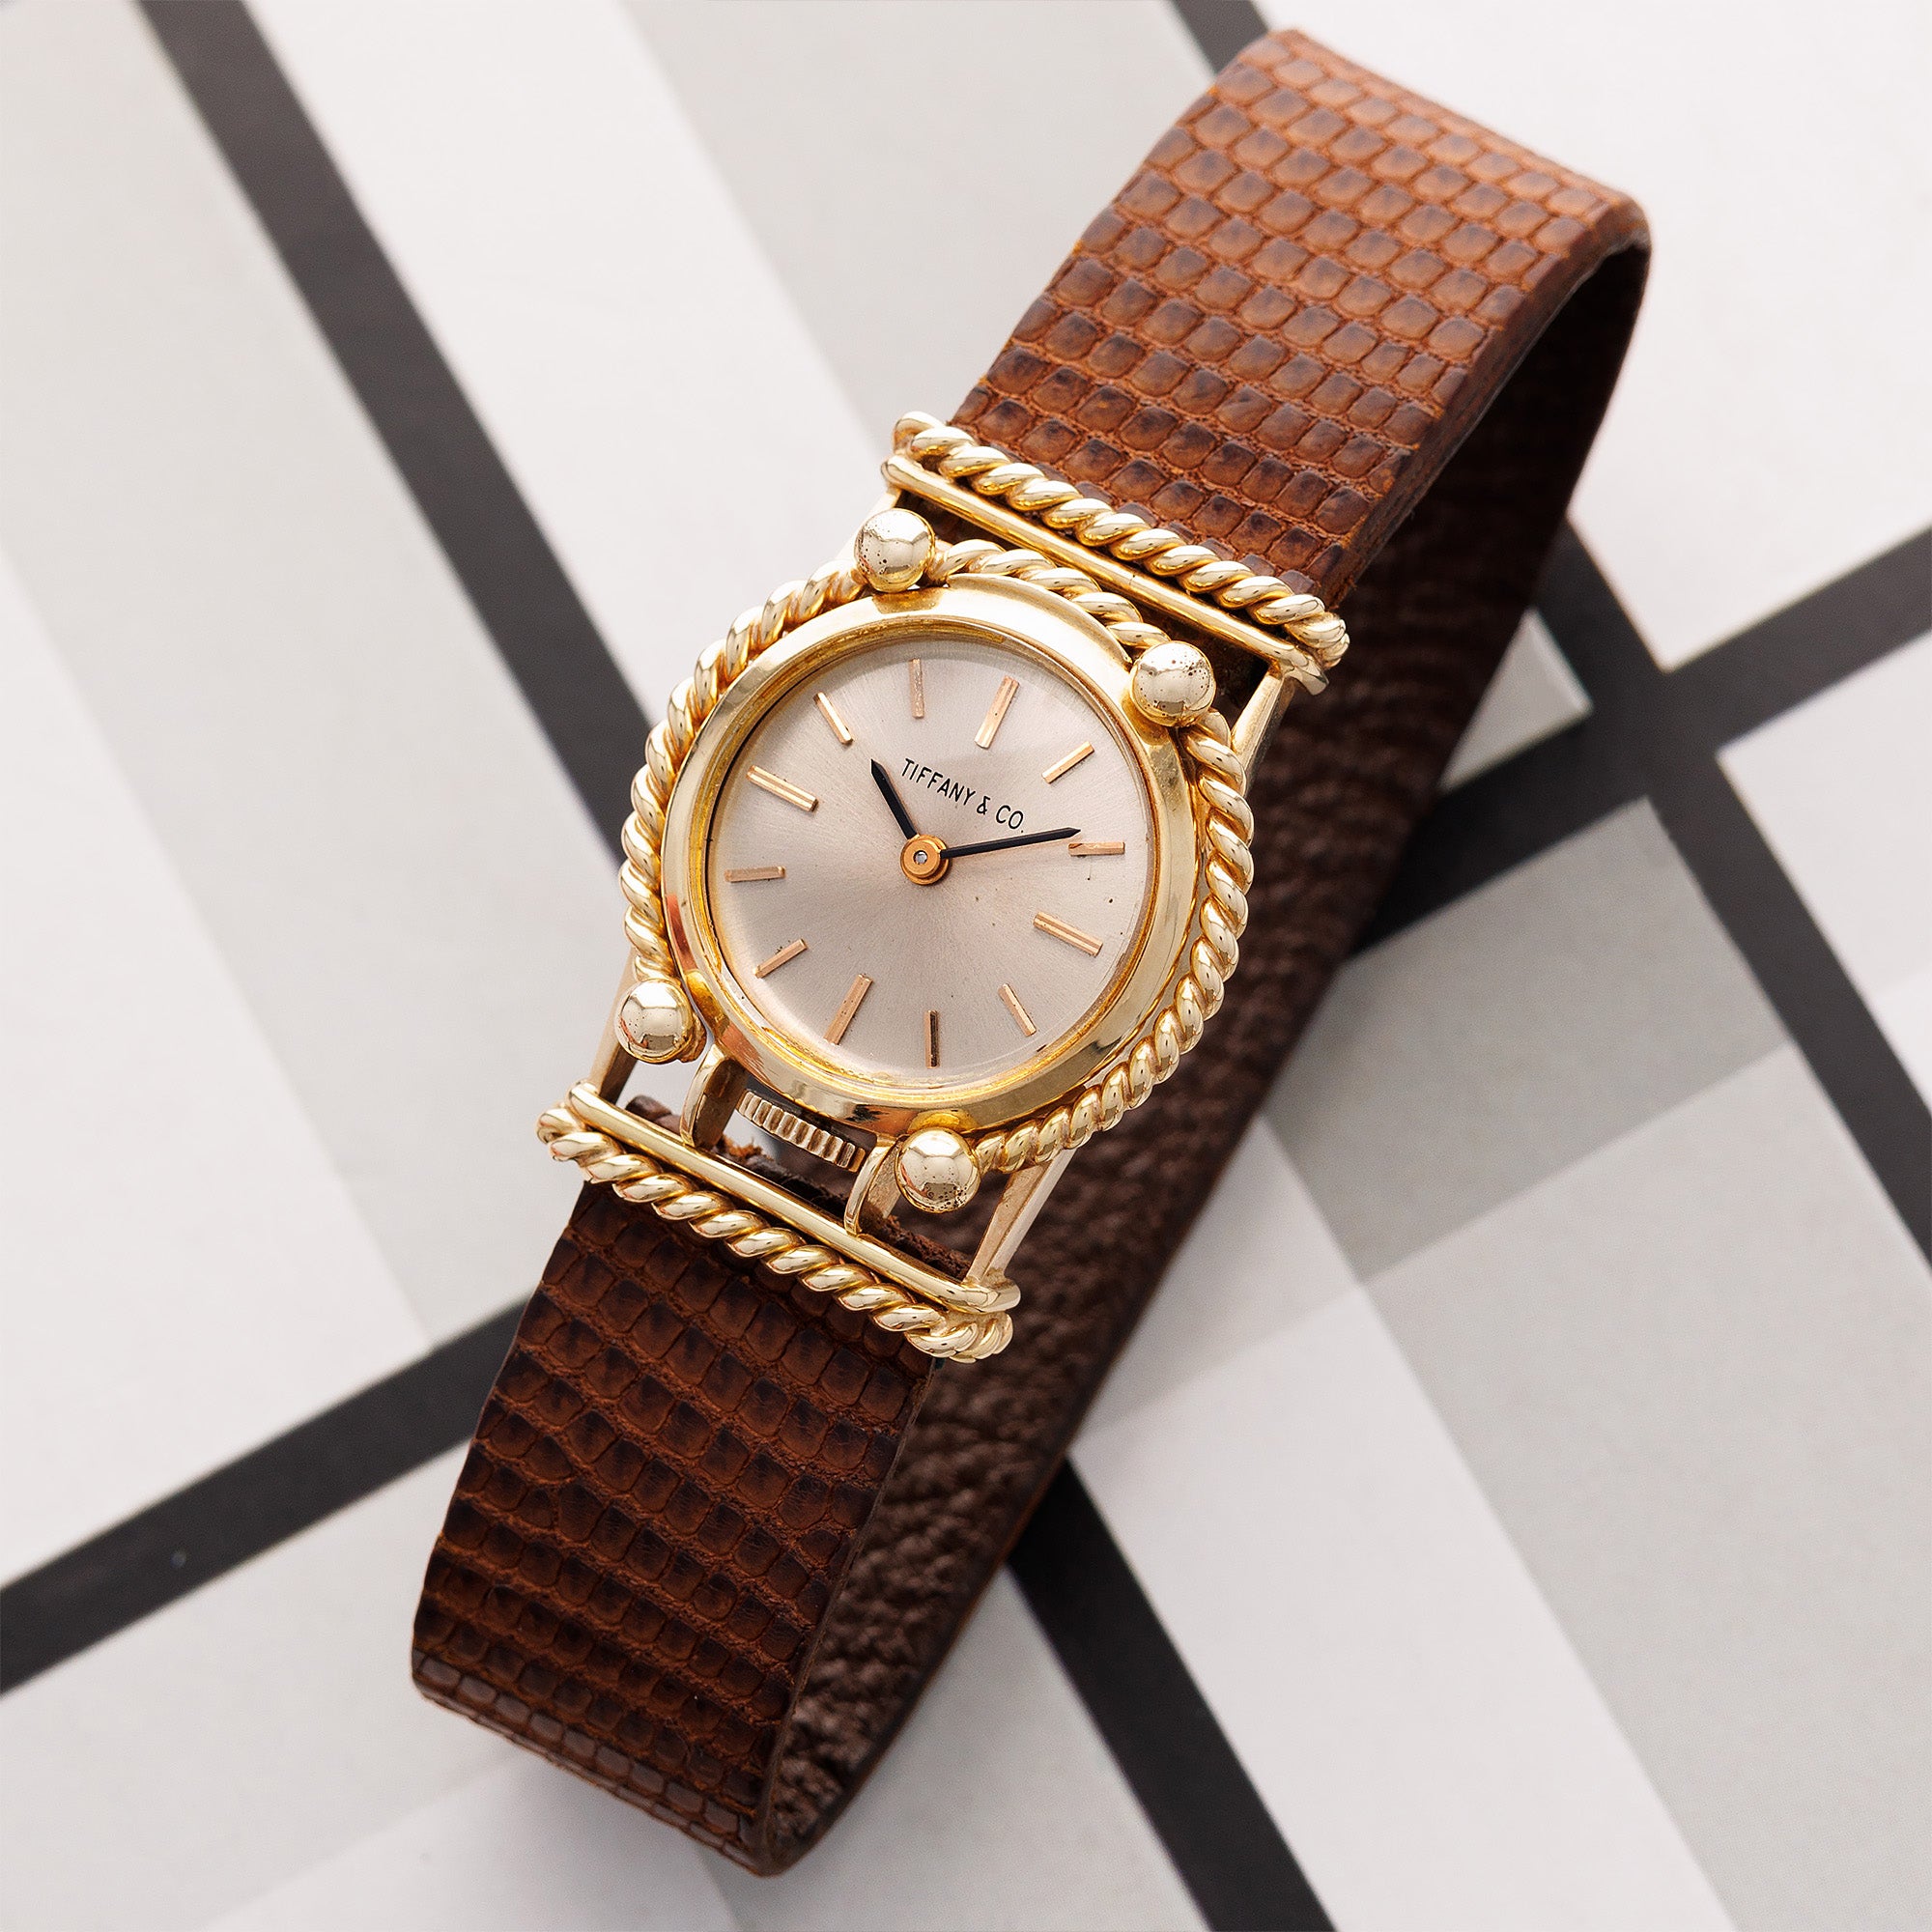 Tiffany & Co. - Tiffany & Co. Schlumberger Yellow Gold Watch with Engraving - The Keystone Watches